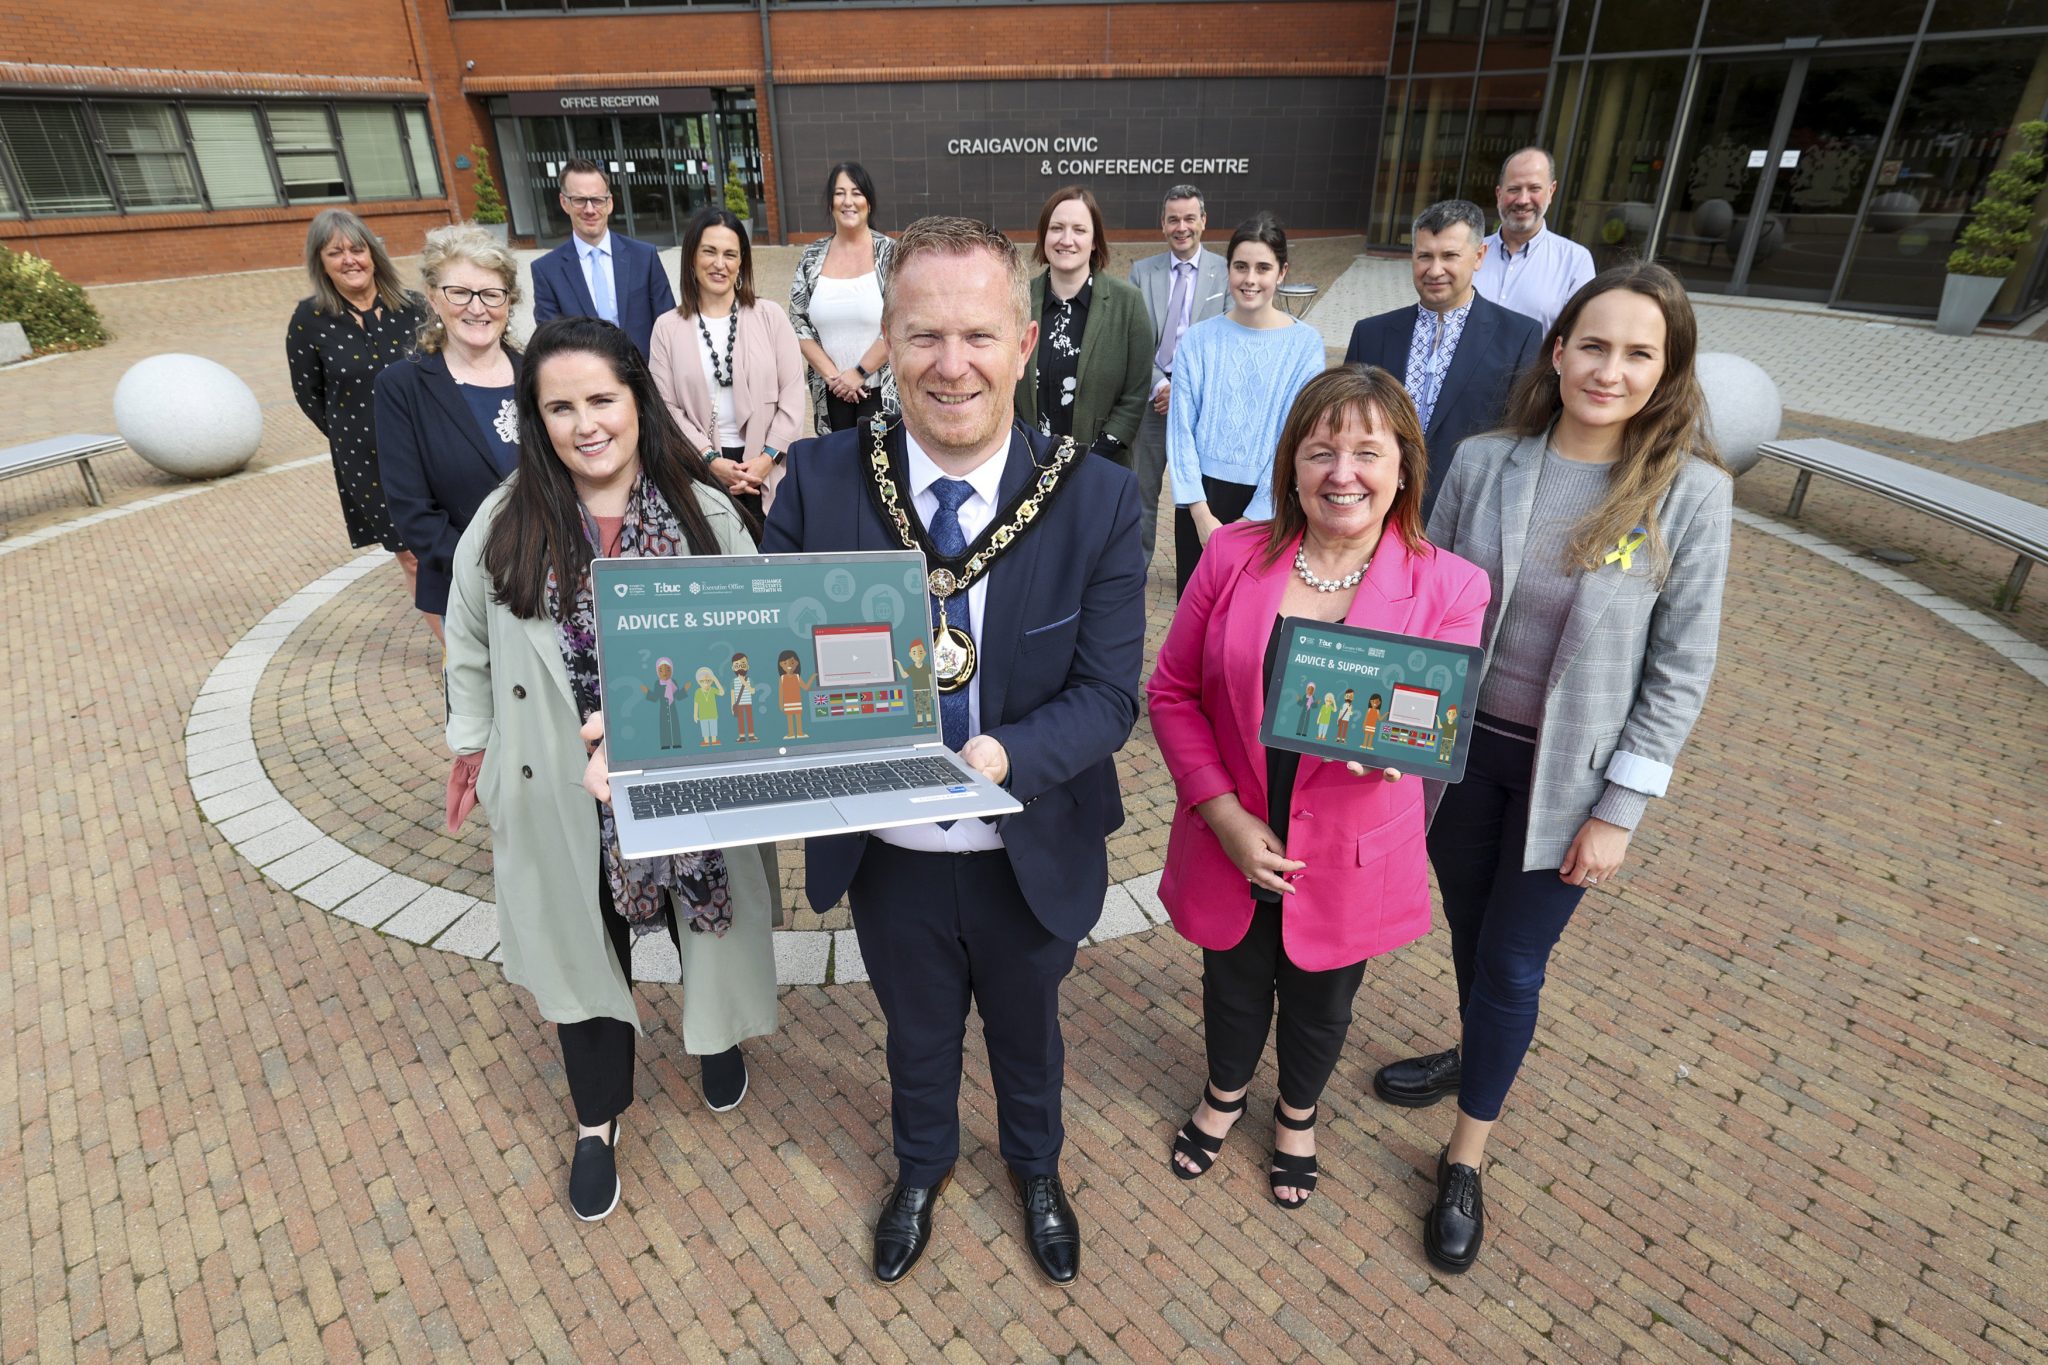 Lord Mayor of Armagh City, Banbridge and Craigavon Councillor Paul Greenfield pictured alongside representatives from the Law Centre NI, The Executive Office, Ukrainians in Northern Ireland Community Group and ABC Council officials at the launch of ABC Council’s new multi-lingual information hub. 